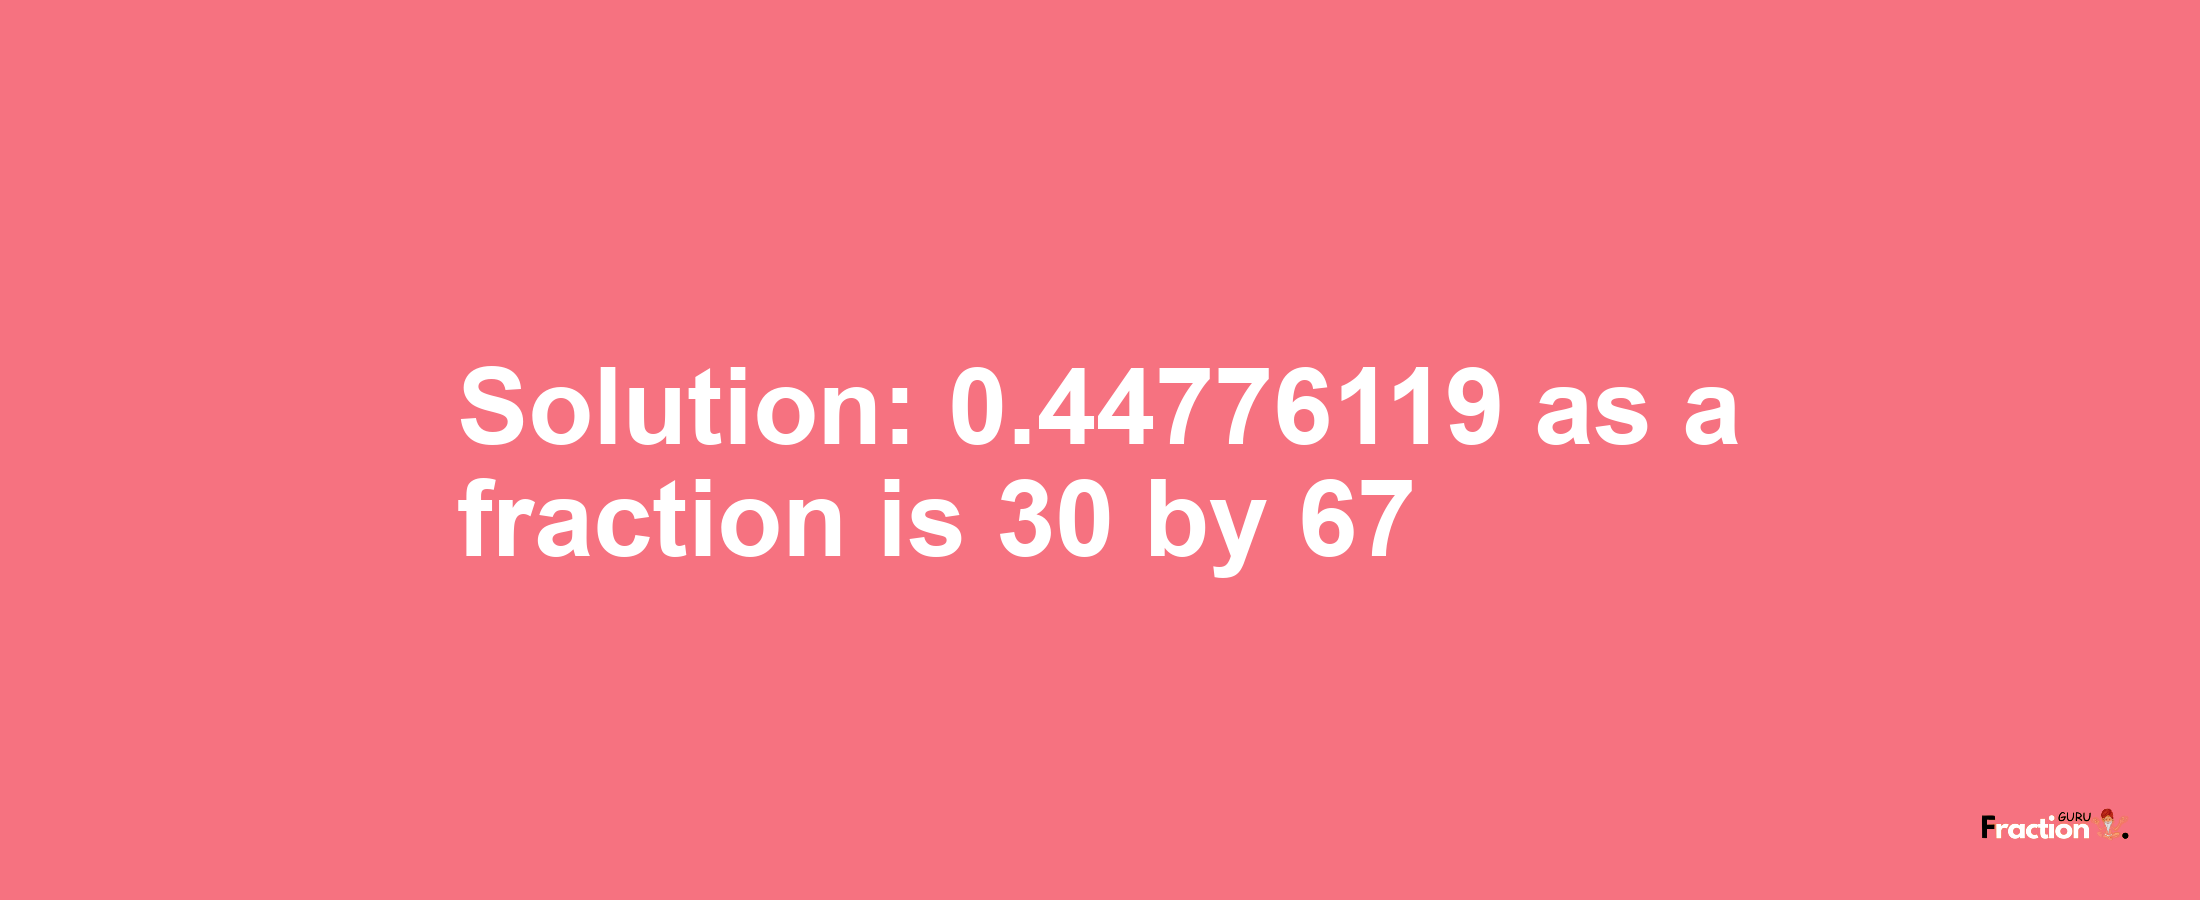 Solution:0.44776119 as a fraction is 30/67